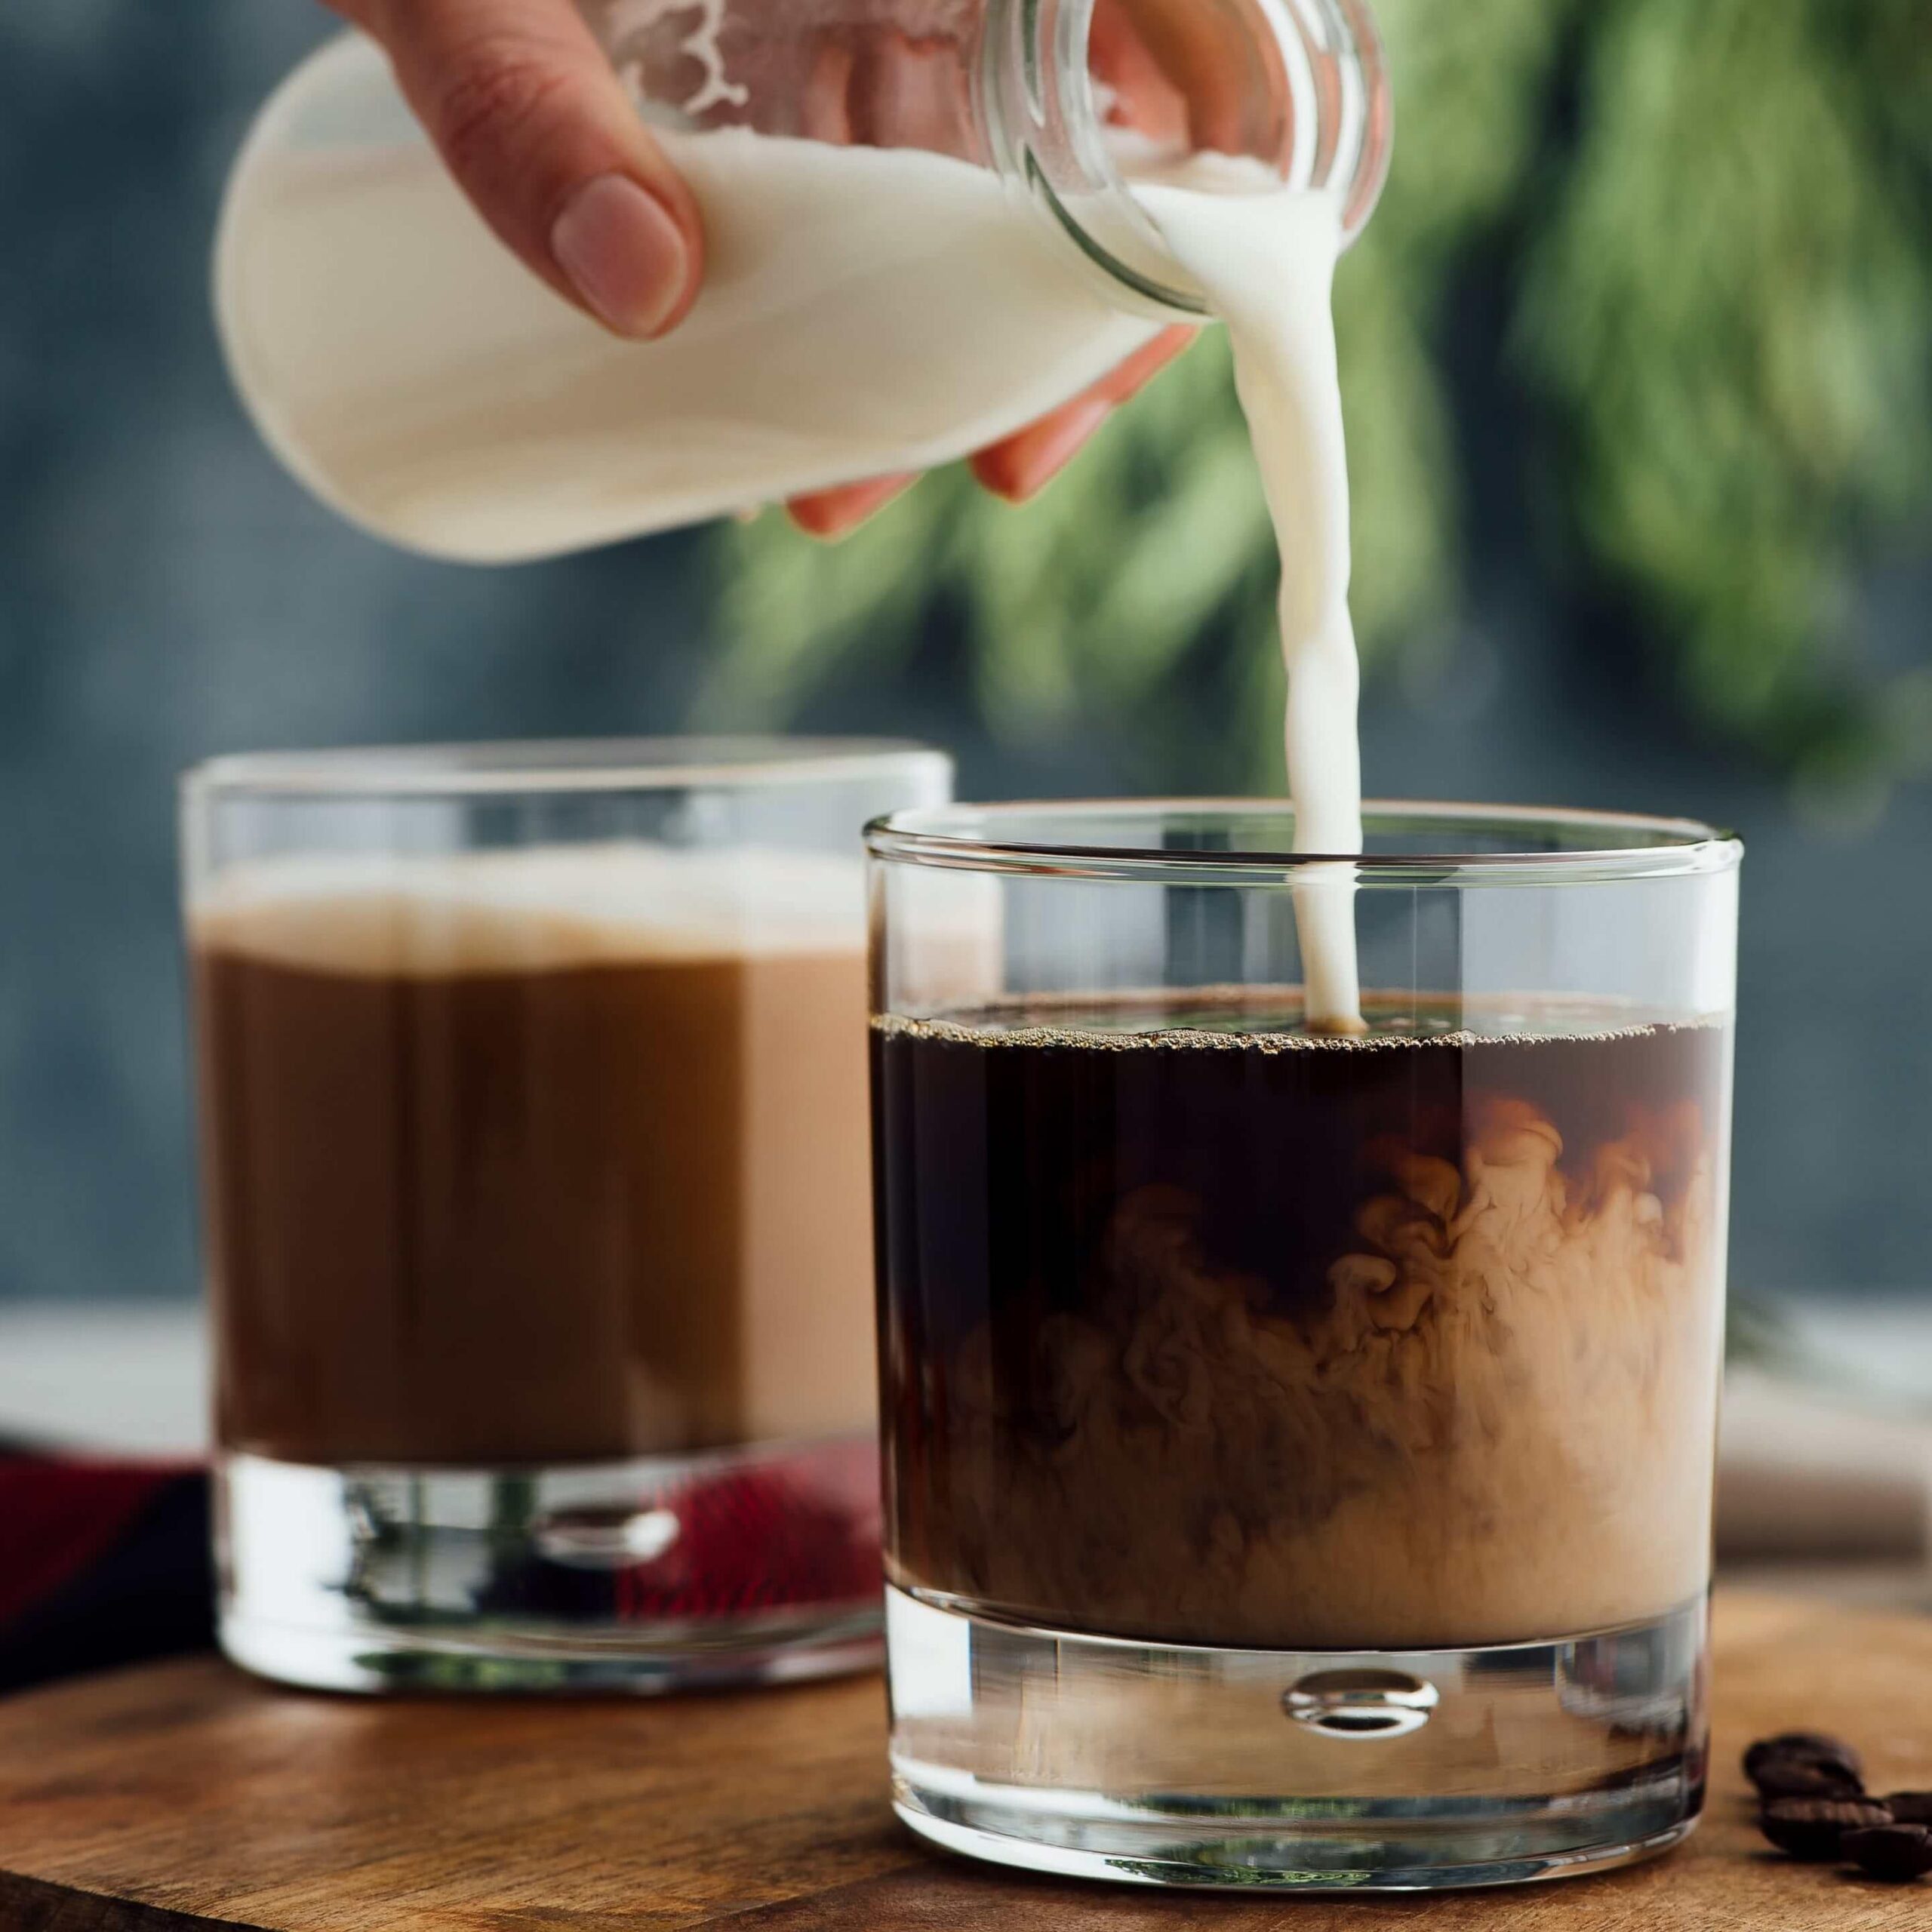  Take a sip of the Russian winter wonderland with this coffee recipe!